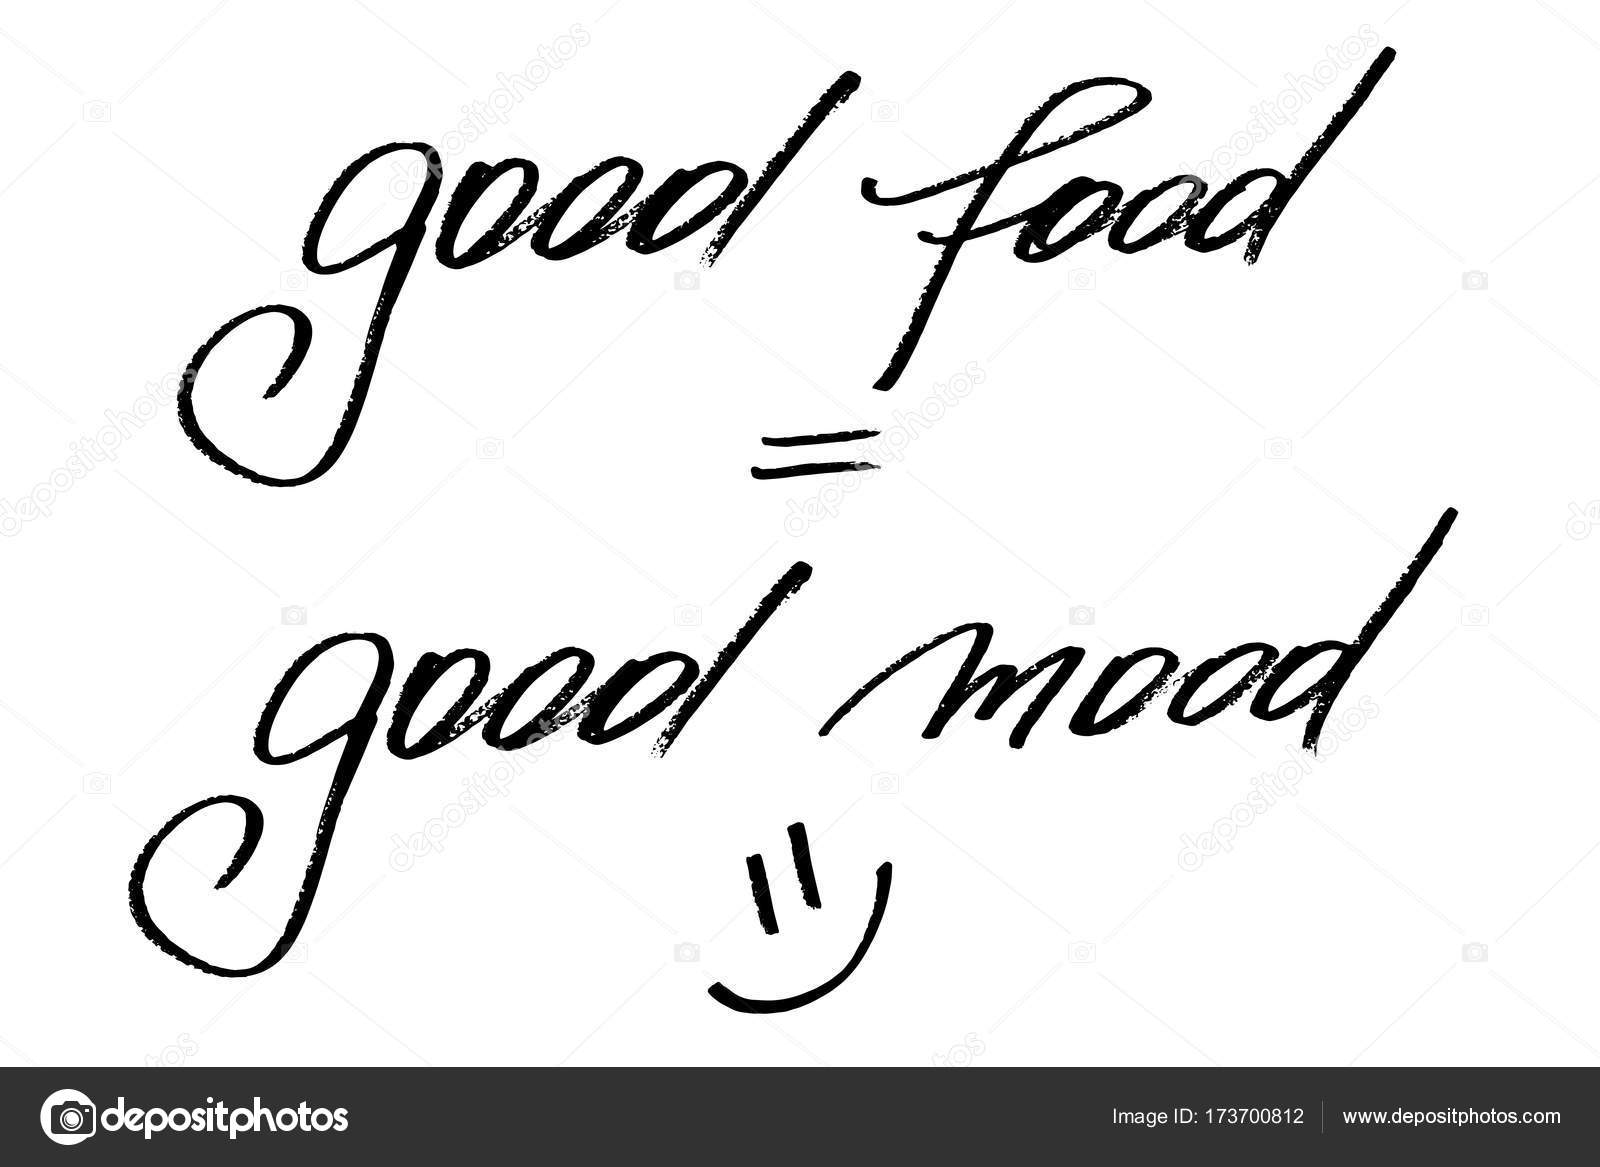 Drawn Good Quote Good OFF Lettering Hand 55% About, Mood Vector Food